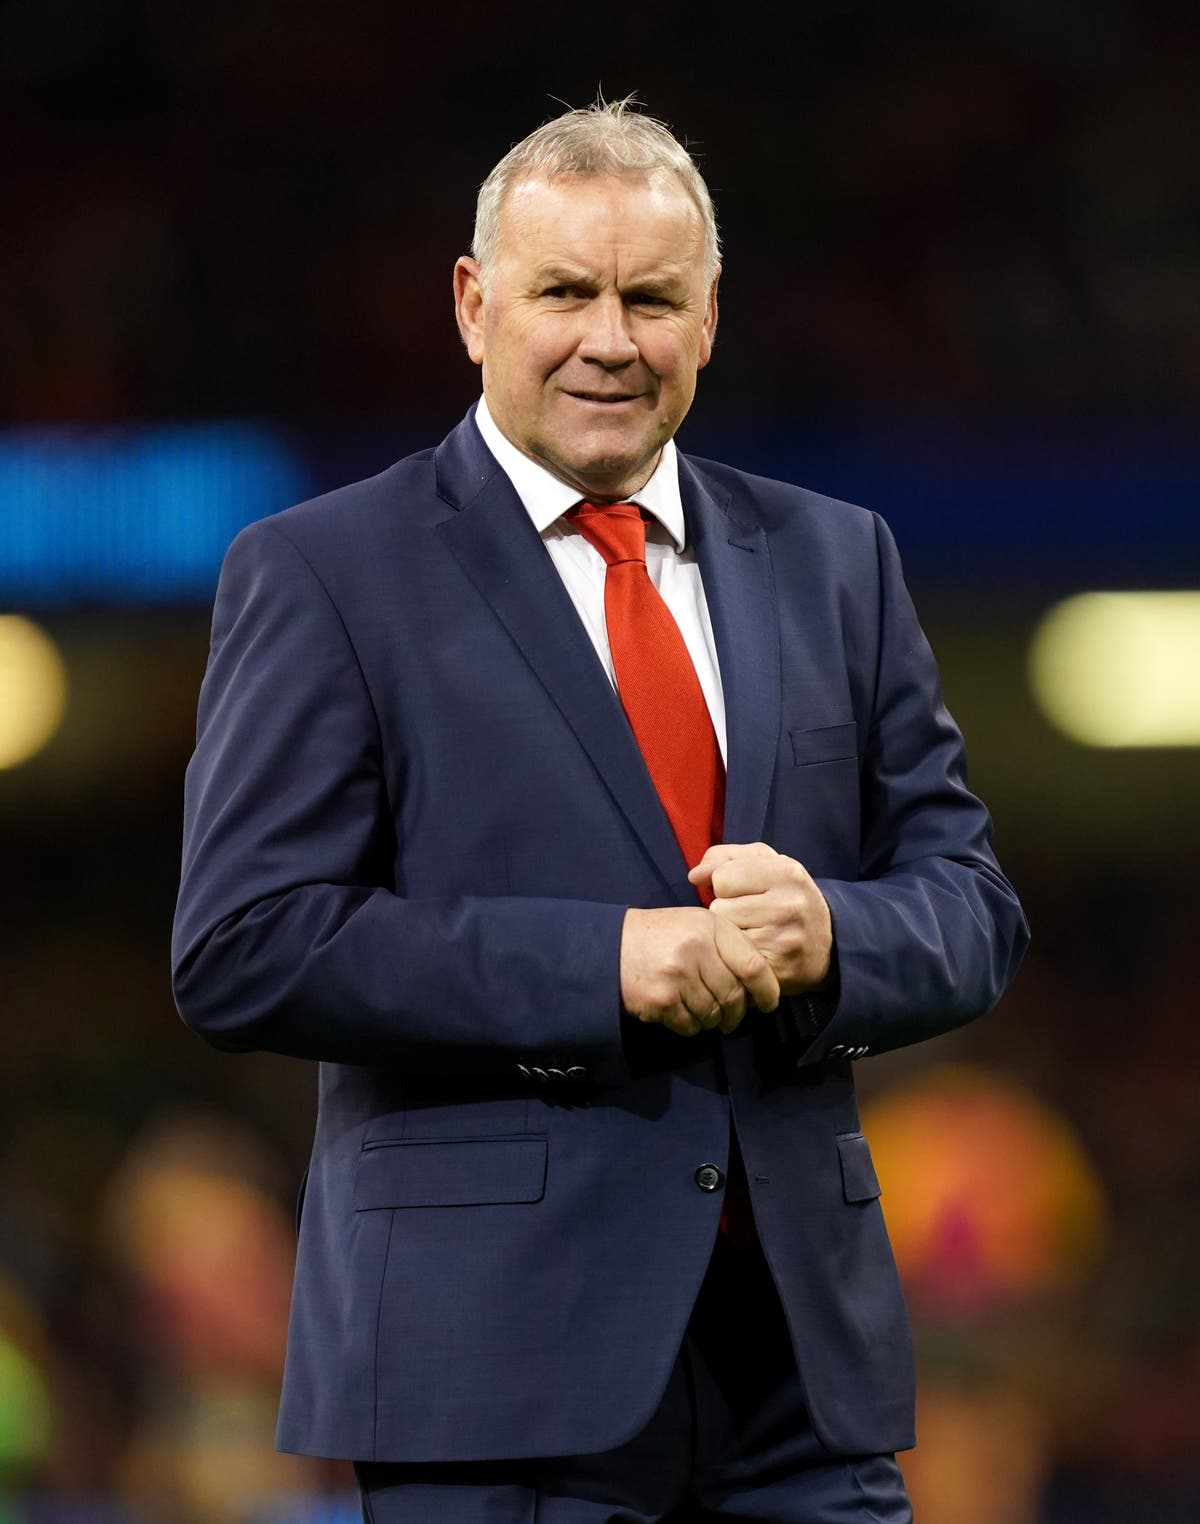 Wayne Pivac senses ‘big challenge’ from Six Nations rivals as Wales defend title